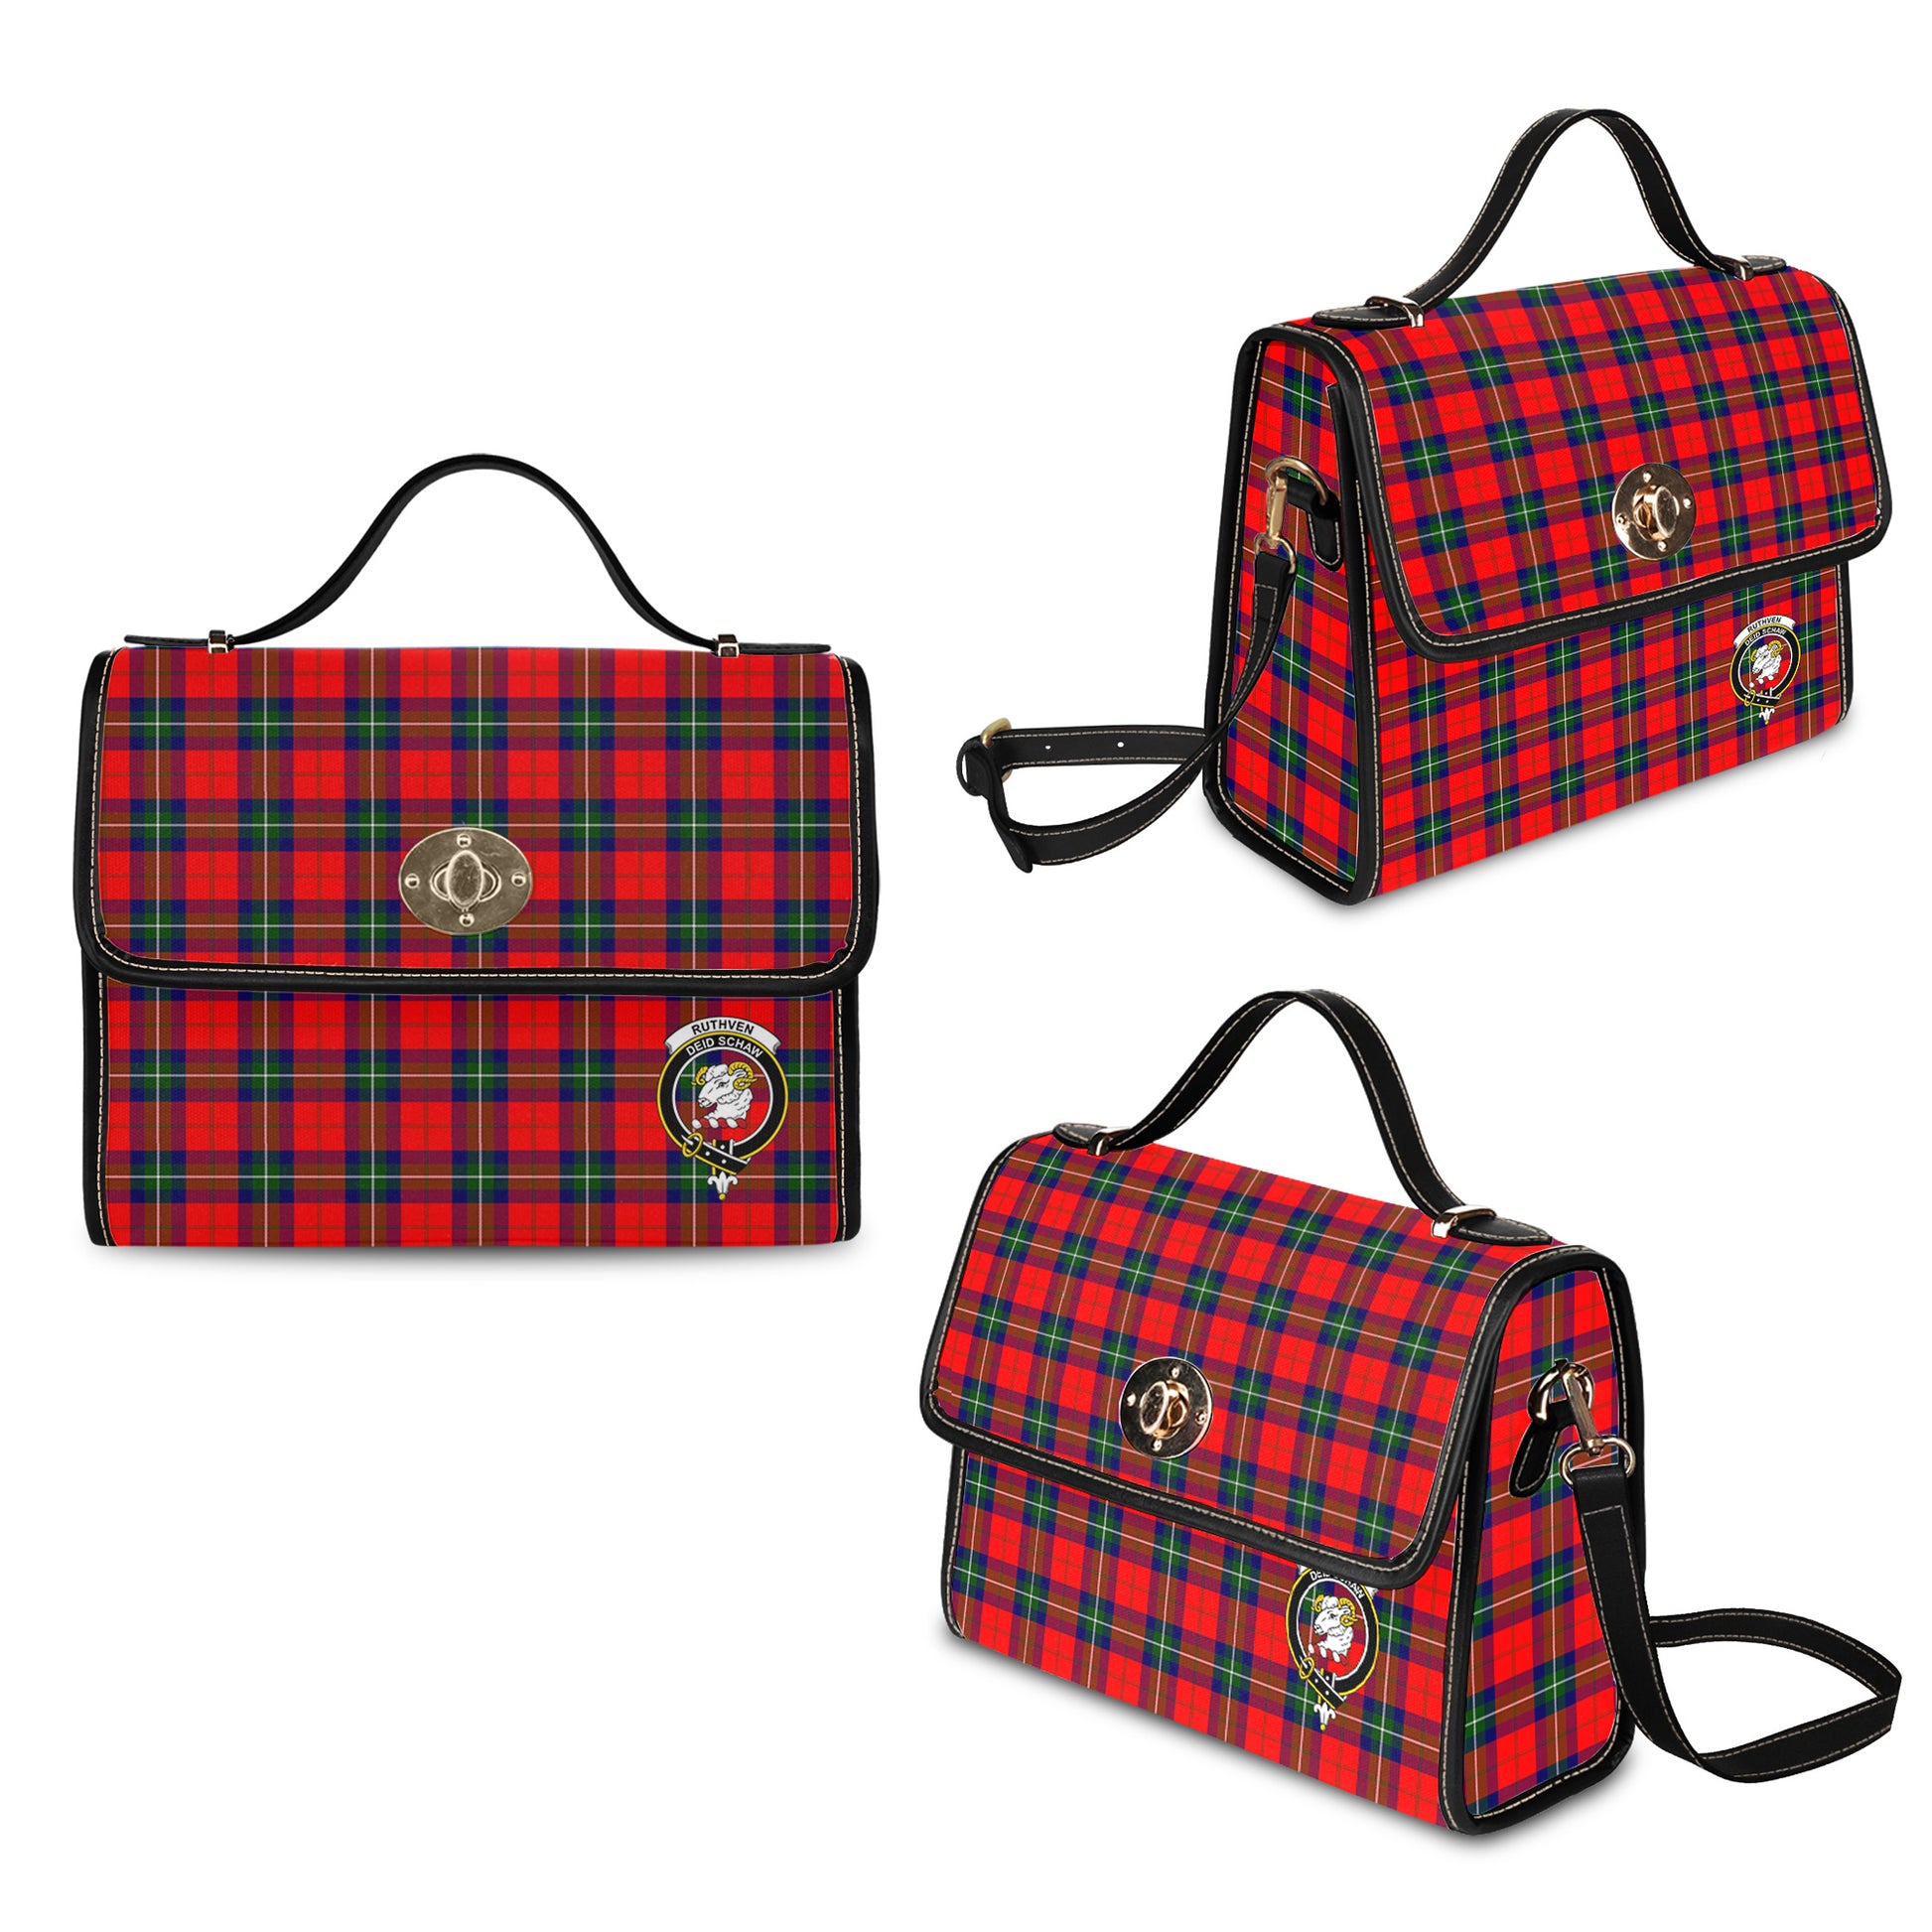 ruthven-modern-tartan-leather-strap-waterproof-canvas-bag-with-family-crest